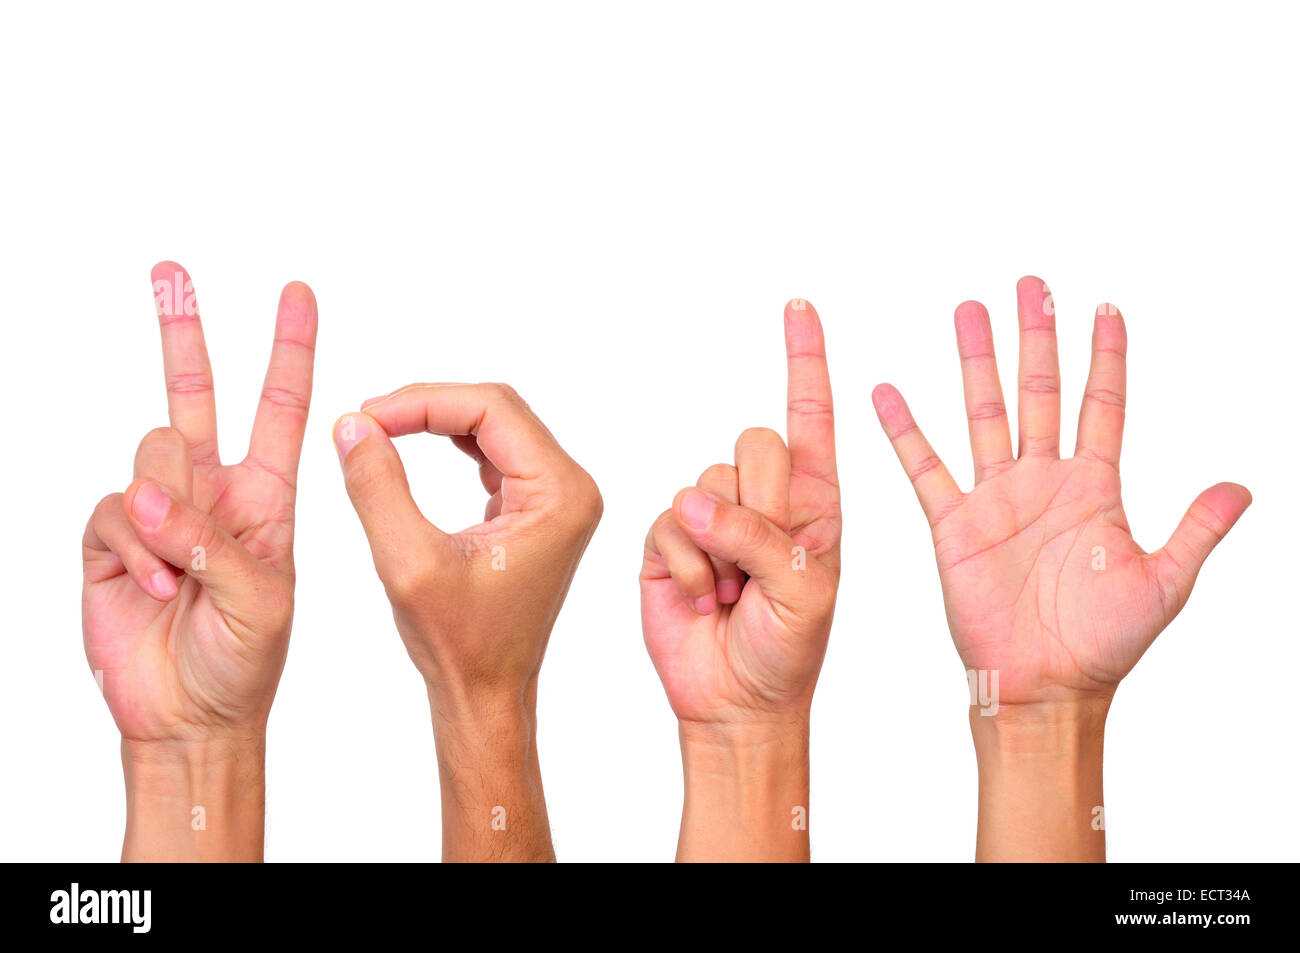 man hands forming the number 2015, as the new year, on a white background Stock Photo